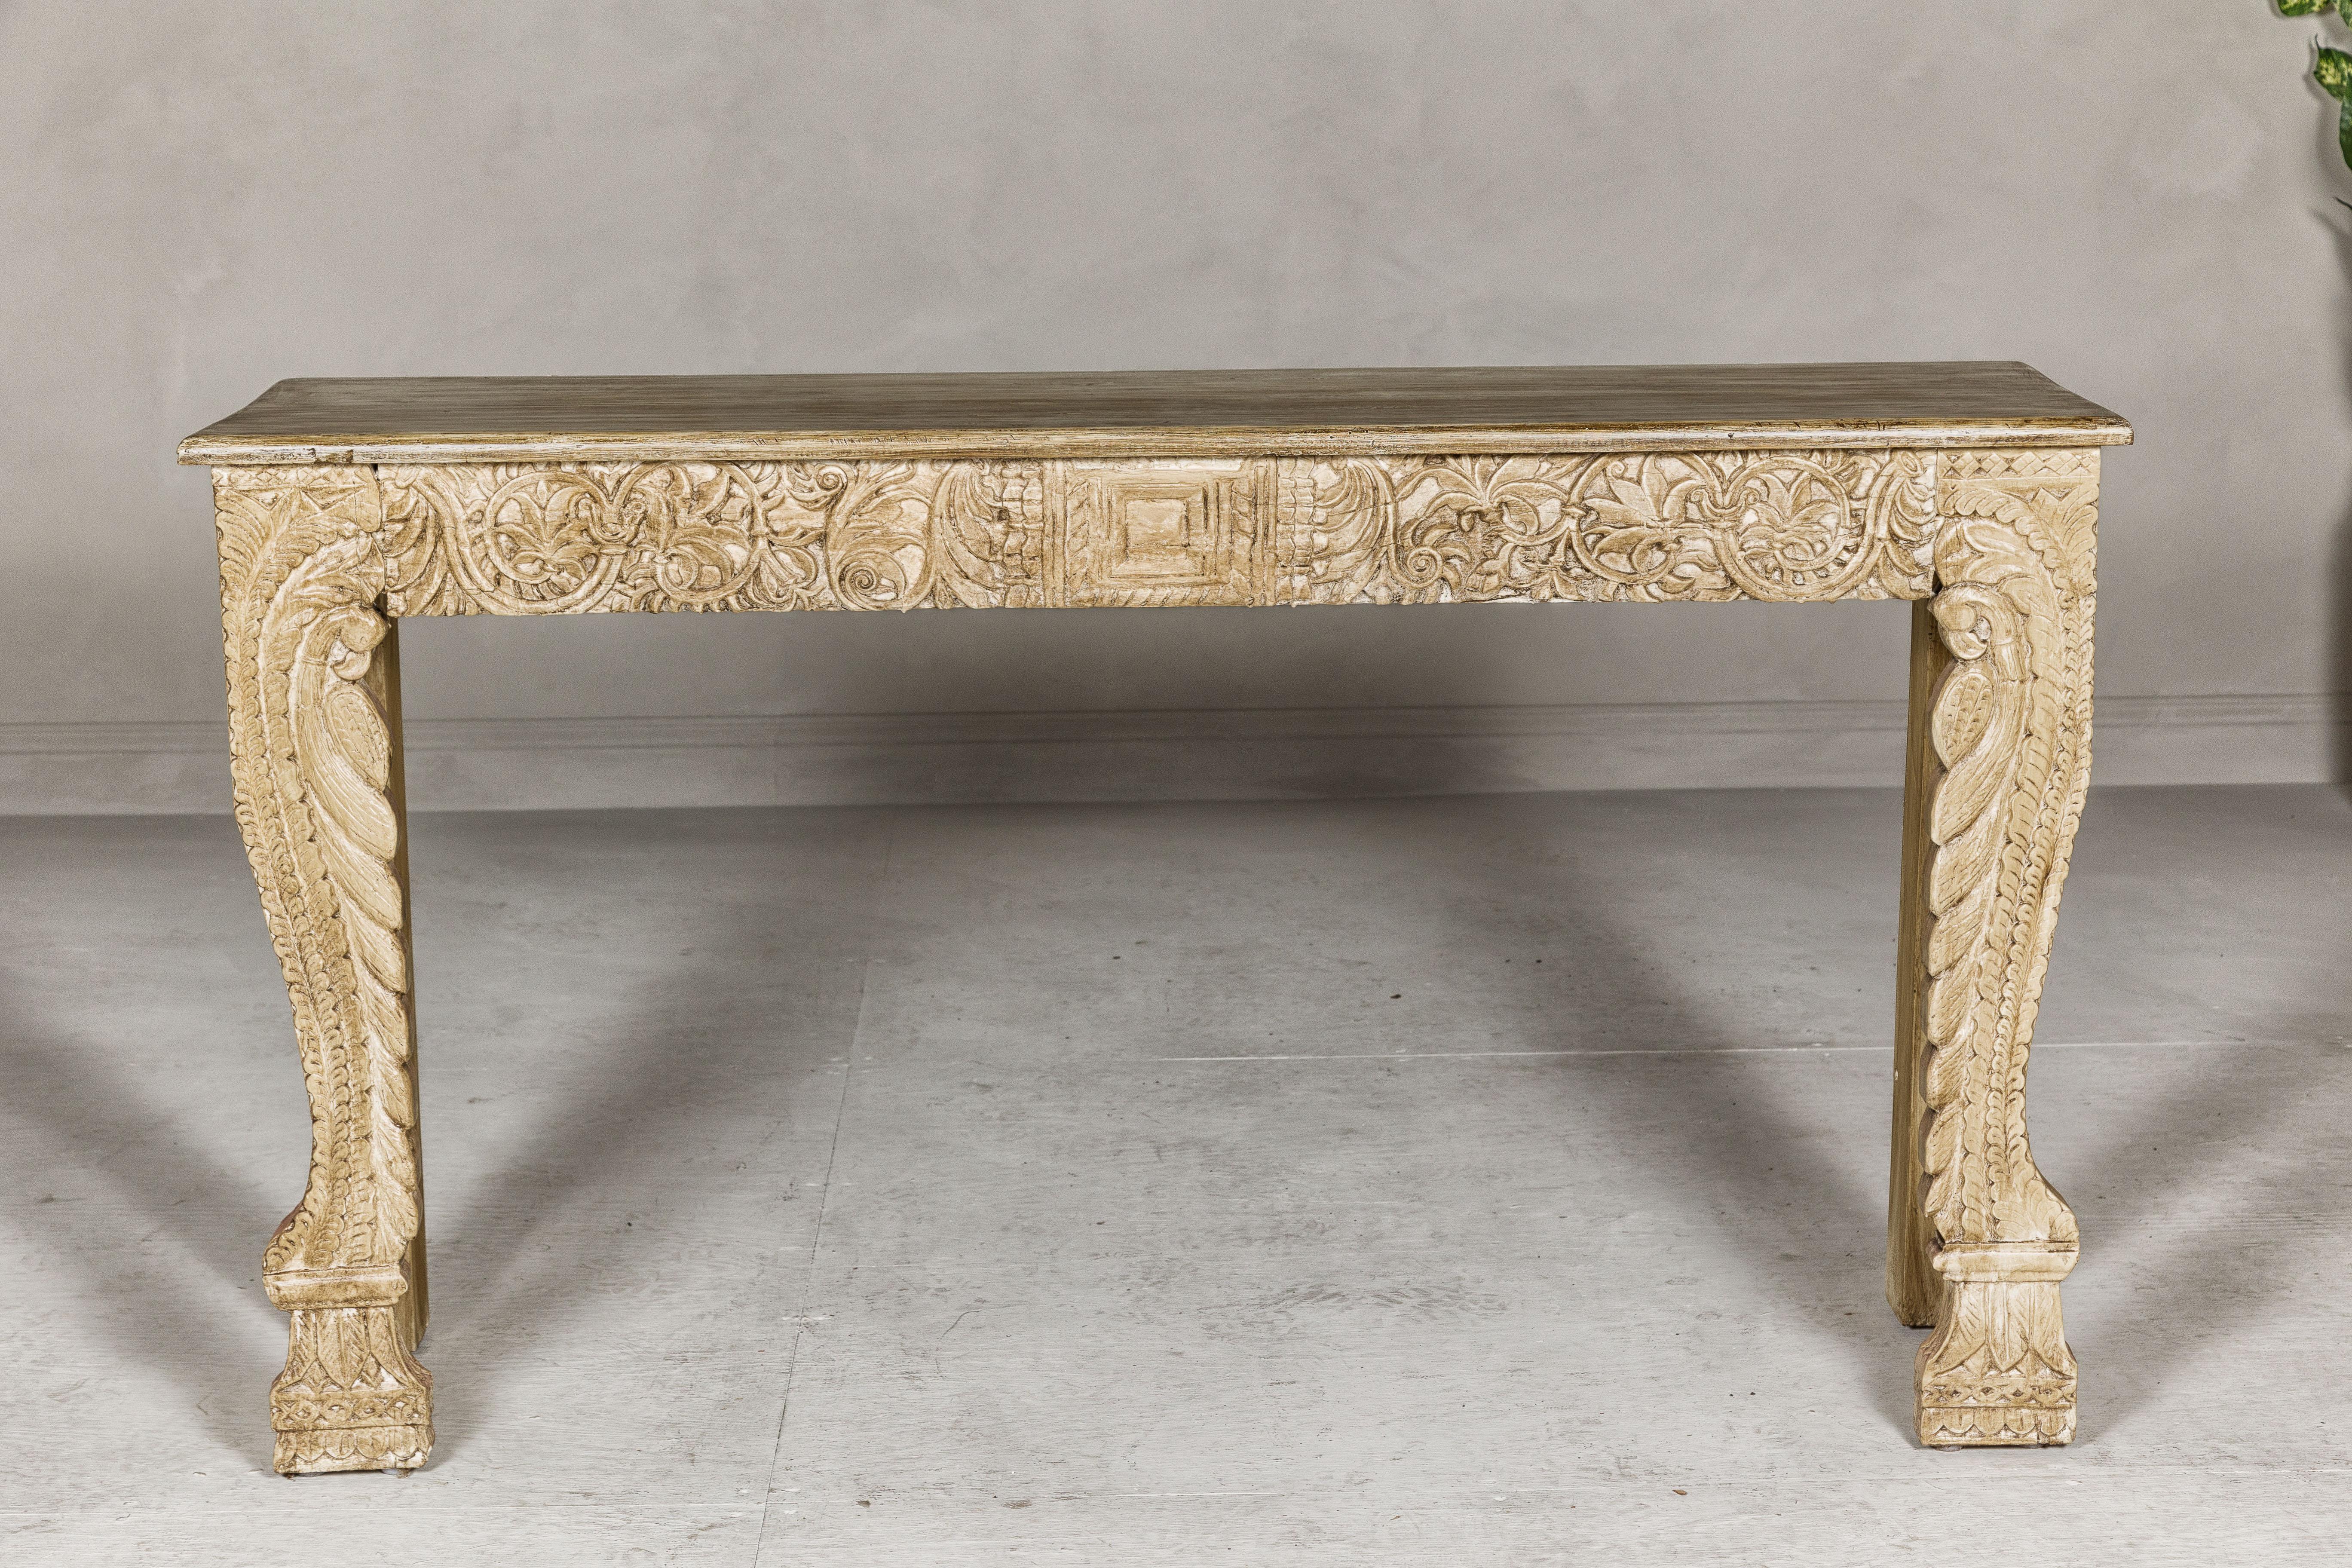 Mughal Style Painted Console Table with Foliage Carved Apron and Legs In Good Condition For Sale In Yonkers, NY